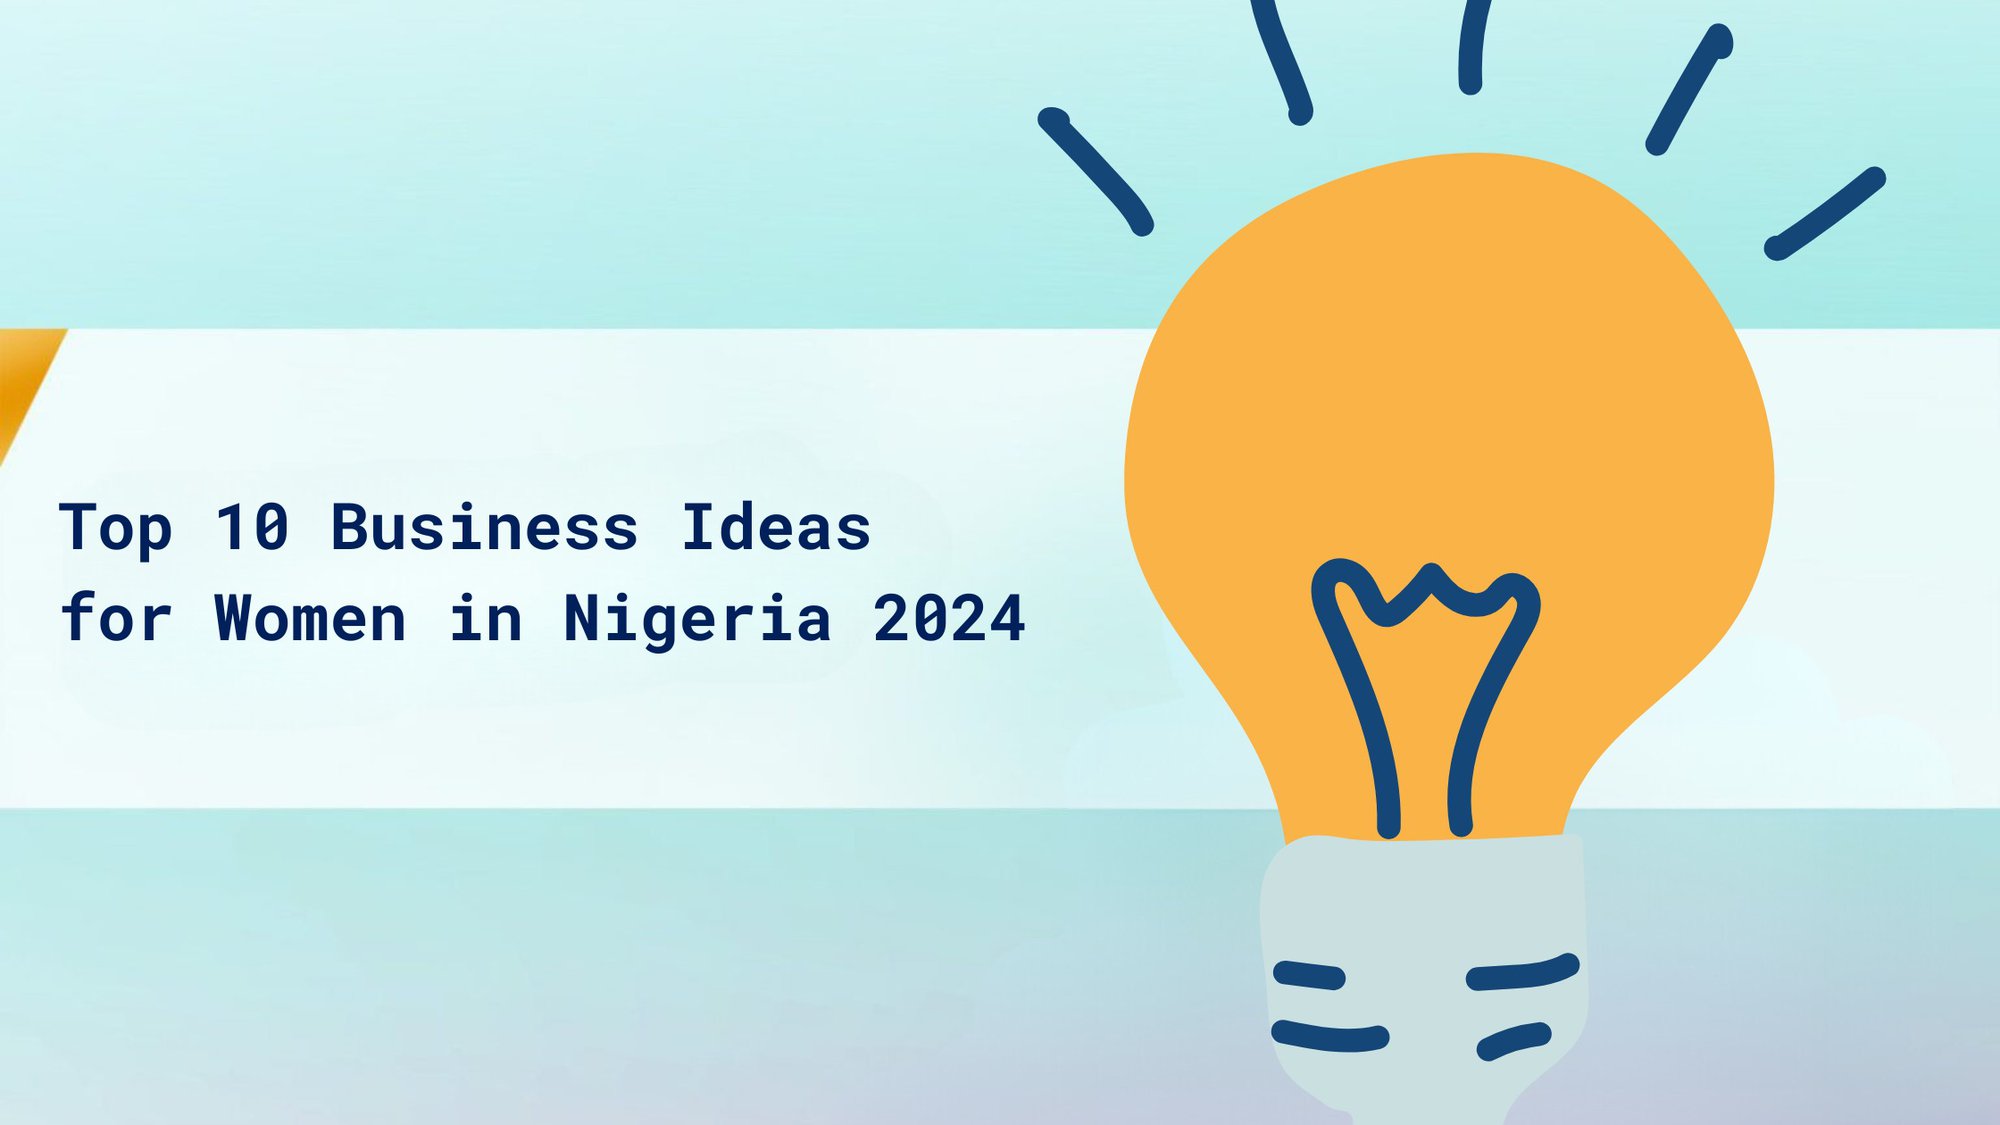 Top 10 Business Ideas for Women in Nigeria 2024 cover